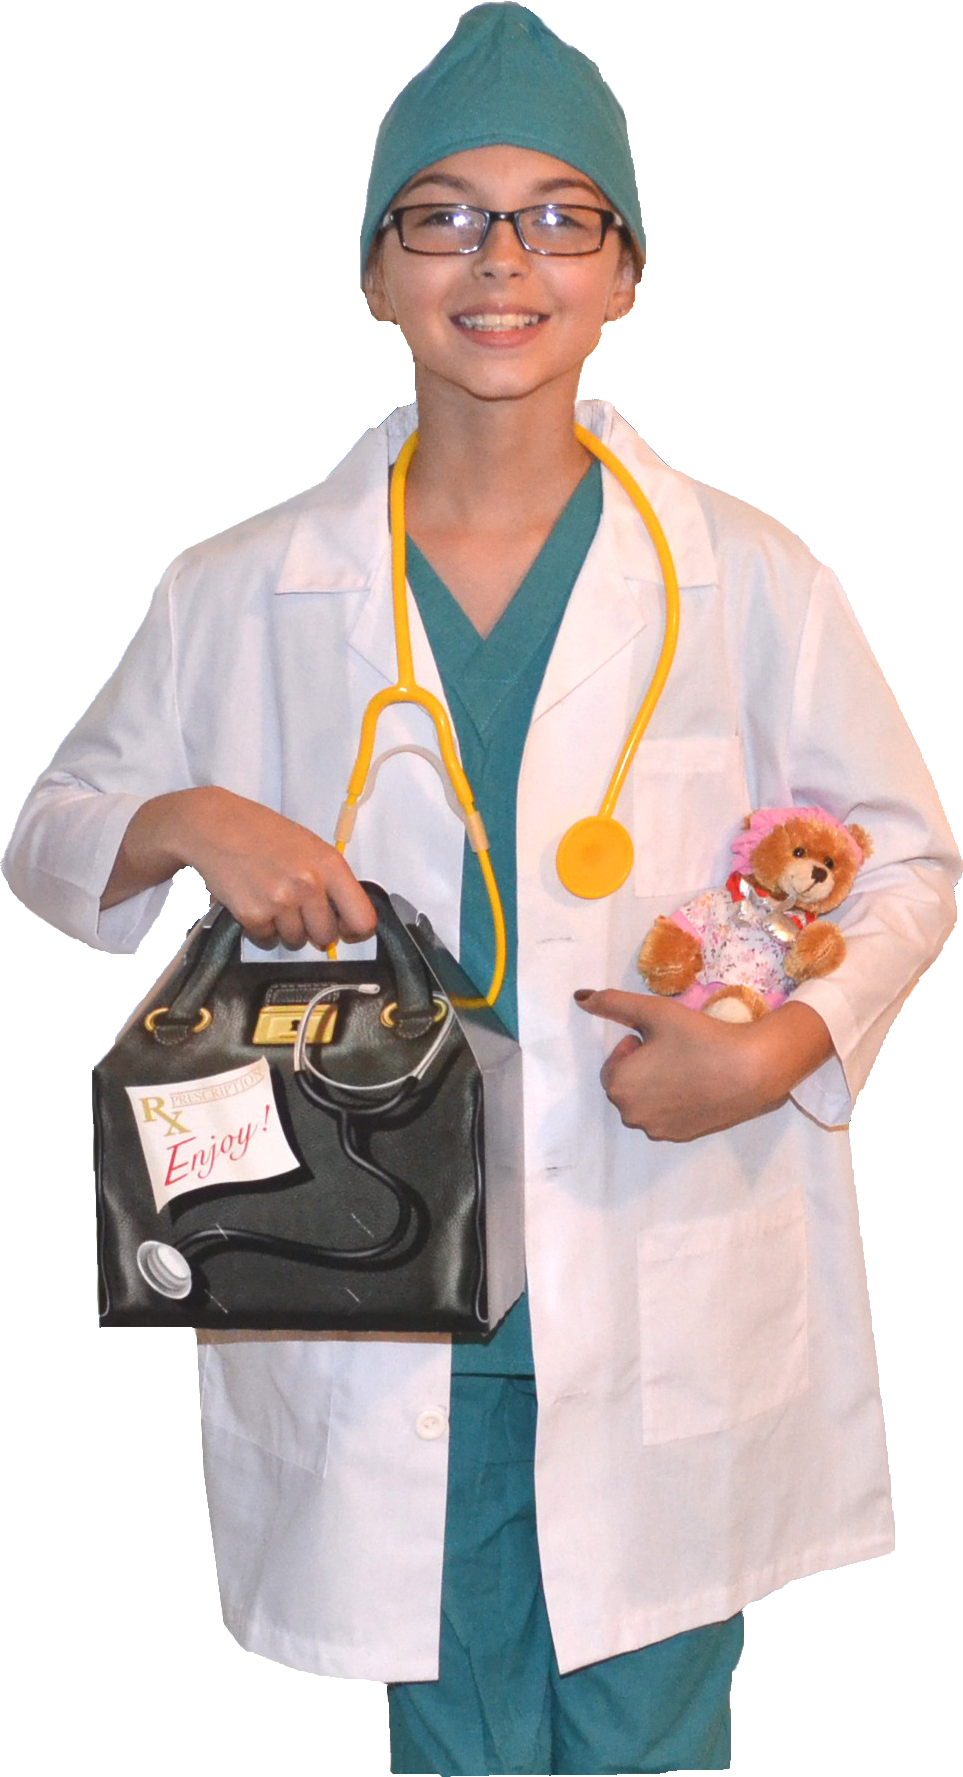 Com Introduces Authentic Doctor Costumes For - Kids Doctor Costume With Real Scrubs And Lab Coat, (963x1777)